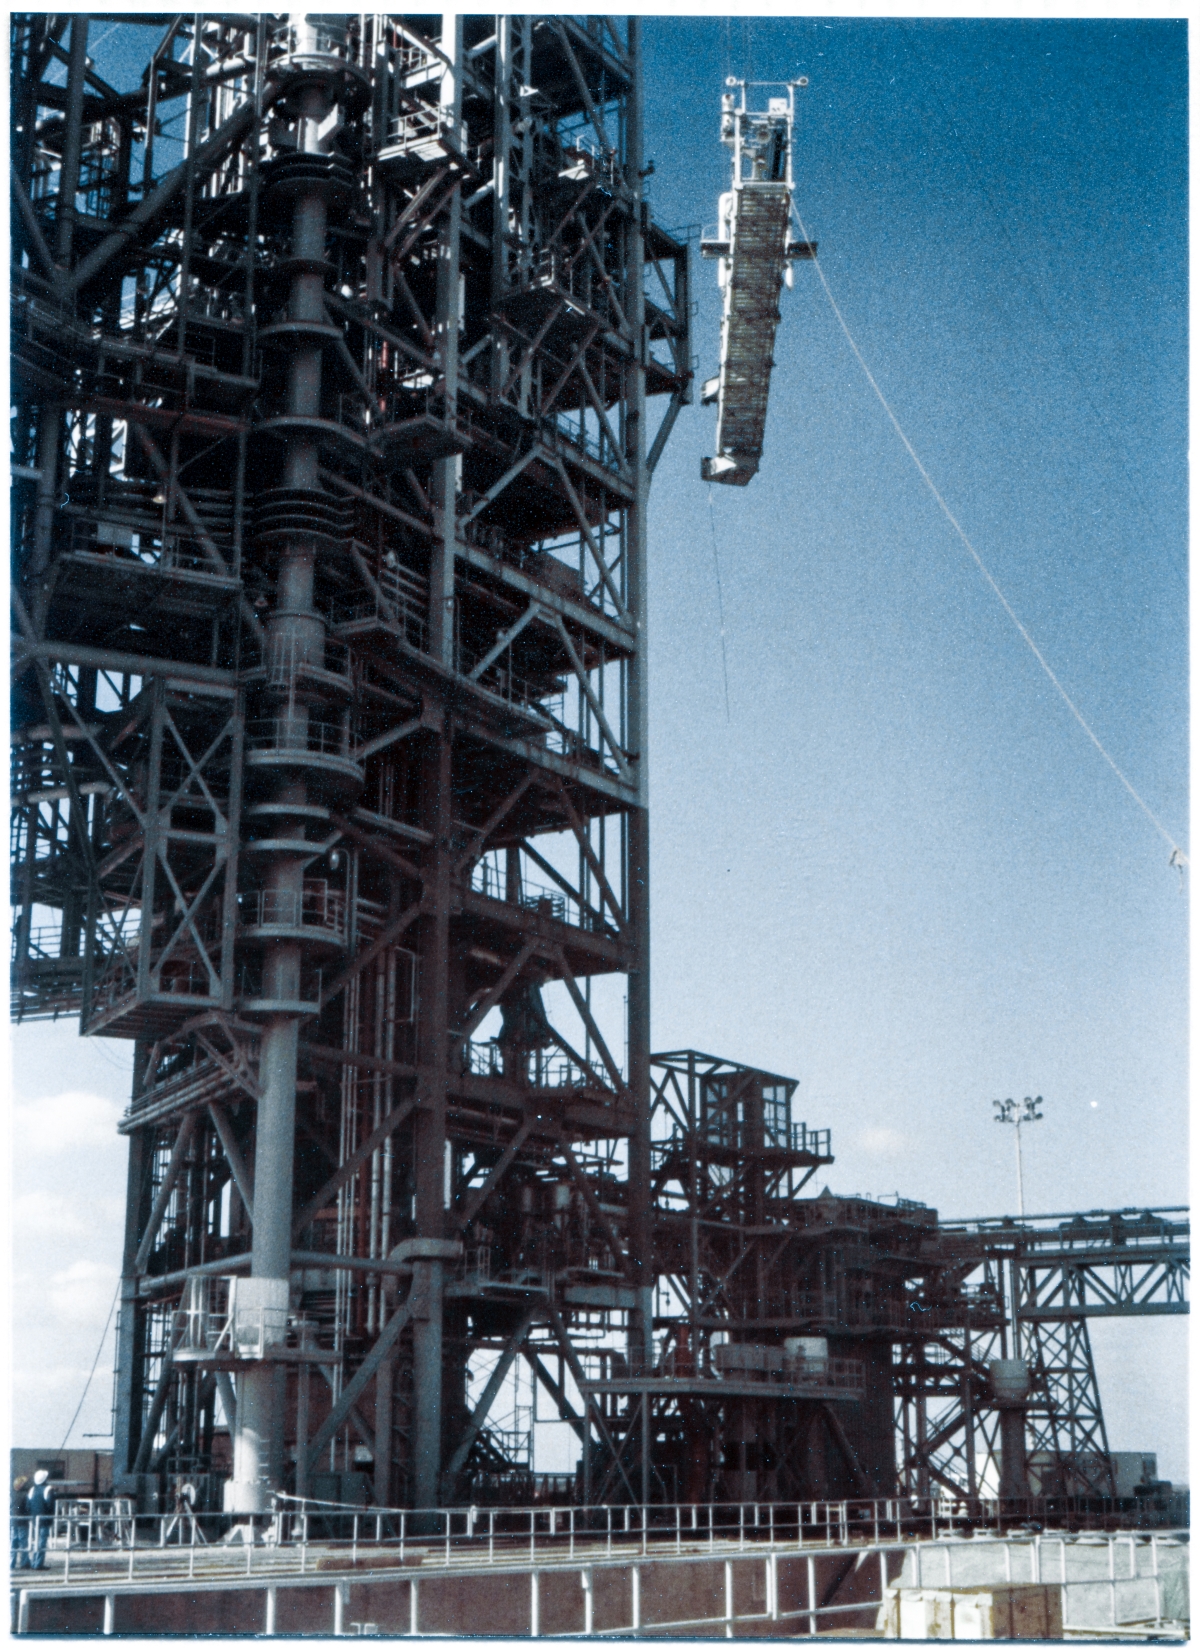 Image 106. At Space Shuttle Launch Complex 39-B, Kennedy Space Center, Florida, the Swing Arm for the Gaseous Oxygen Vent System, better known as the GOX Arm, is being lifted high into the air, near the face of the Fixed Service Structure, a little over half way up to its final location where it will be connected to the FSS. On the ground, in the lower left corner of the photograph, Wade Ivey, owner of Ivey Steel, can be seen watching over the Lift along with Union Ironworker Ray Elkins who is standing next to him. Ivey's organization and crew was top-notch, and the Lift proceeded without issue, and Wade allowed his personnel to do what they do best without interference, but he was there, watching, should anything have occurred that might have required his input. Photo by James MacLaren.